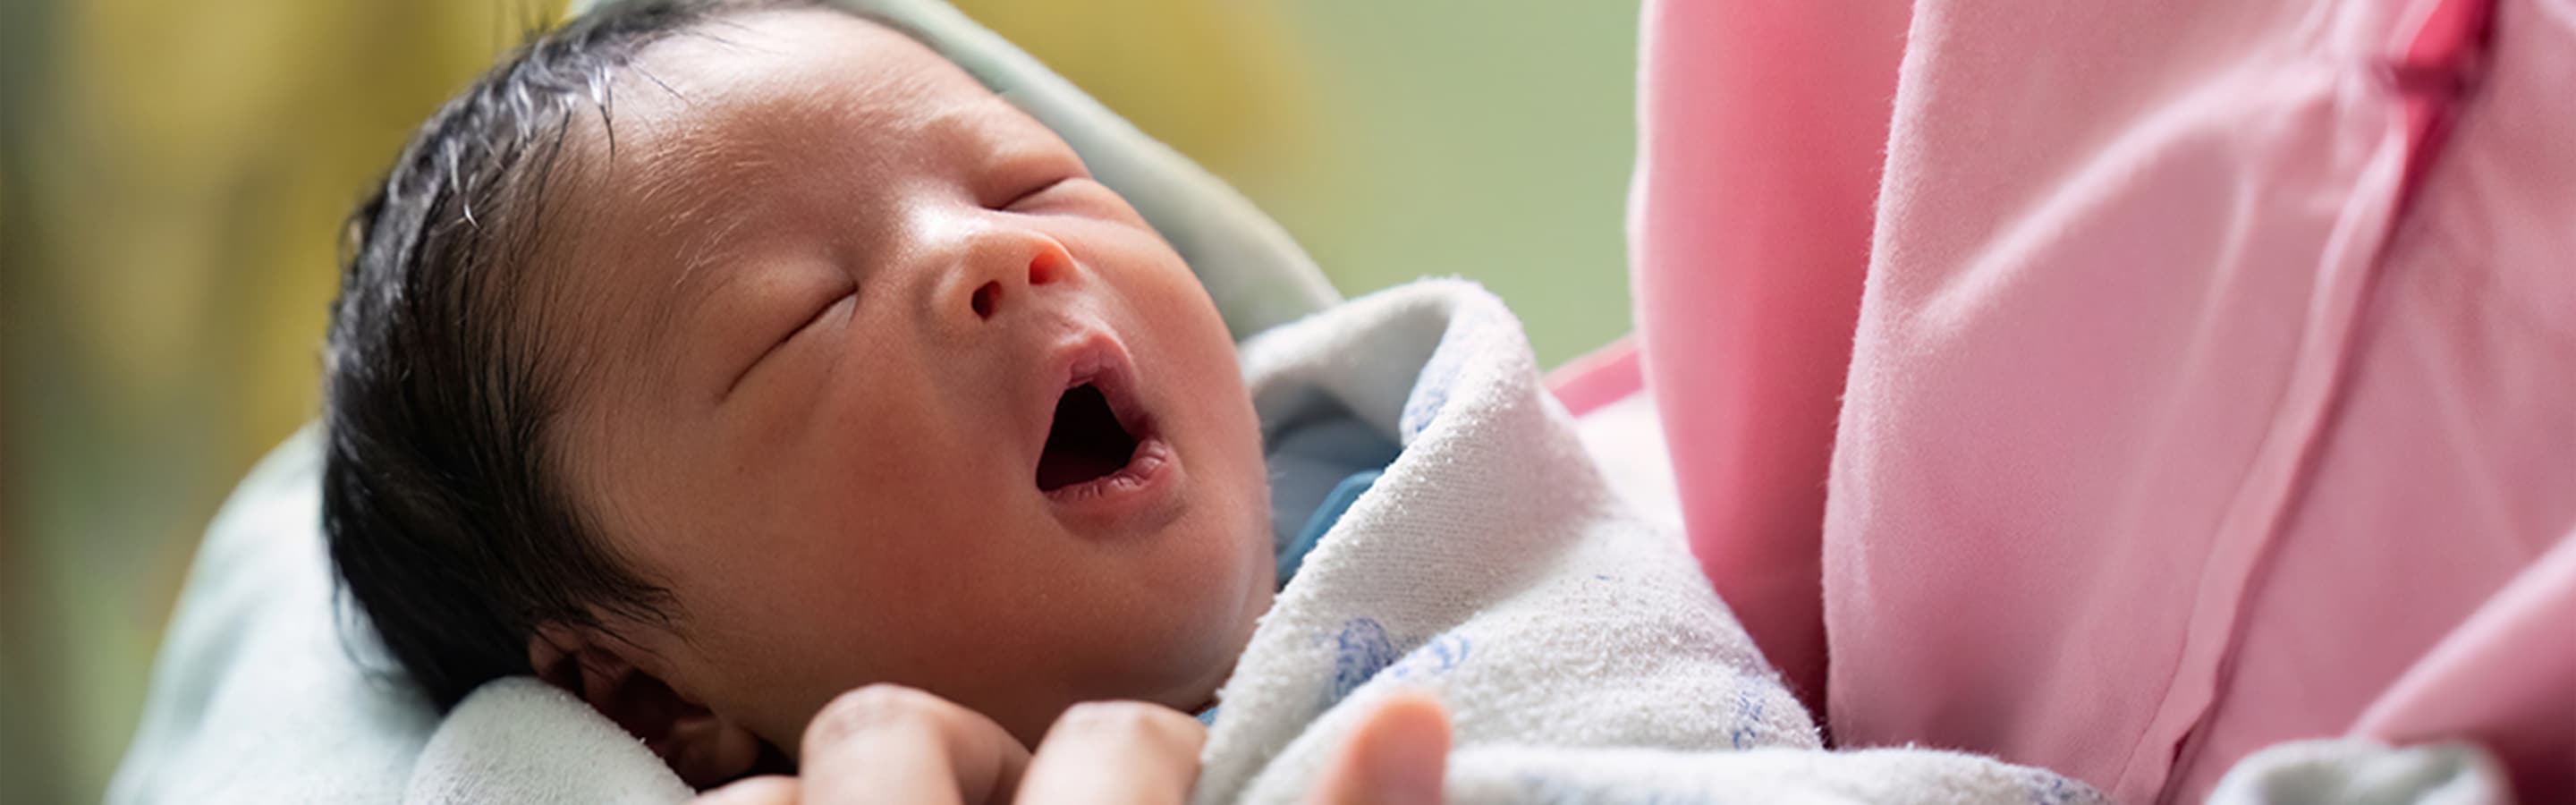 Close up of a small baby yawning